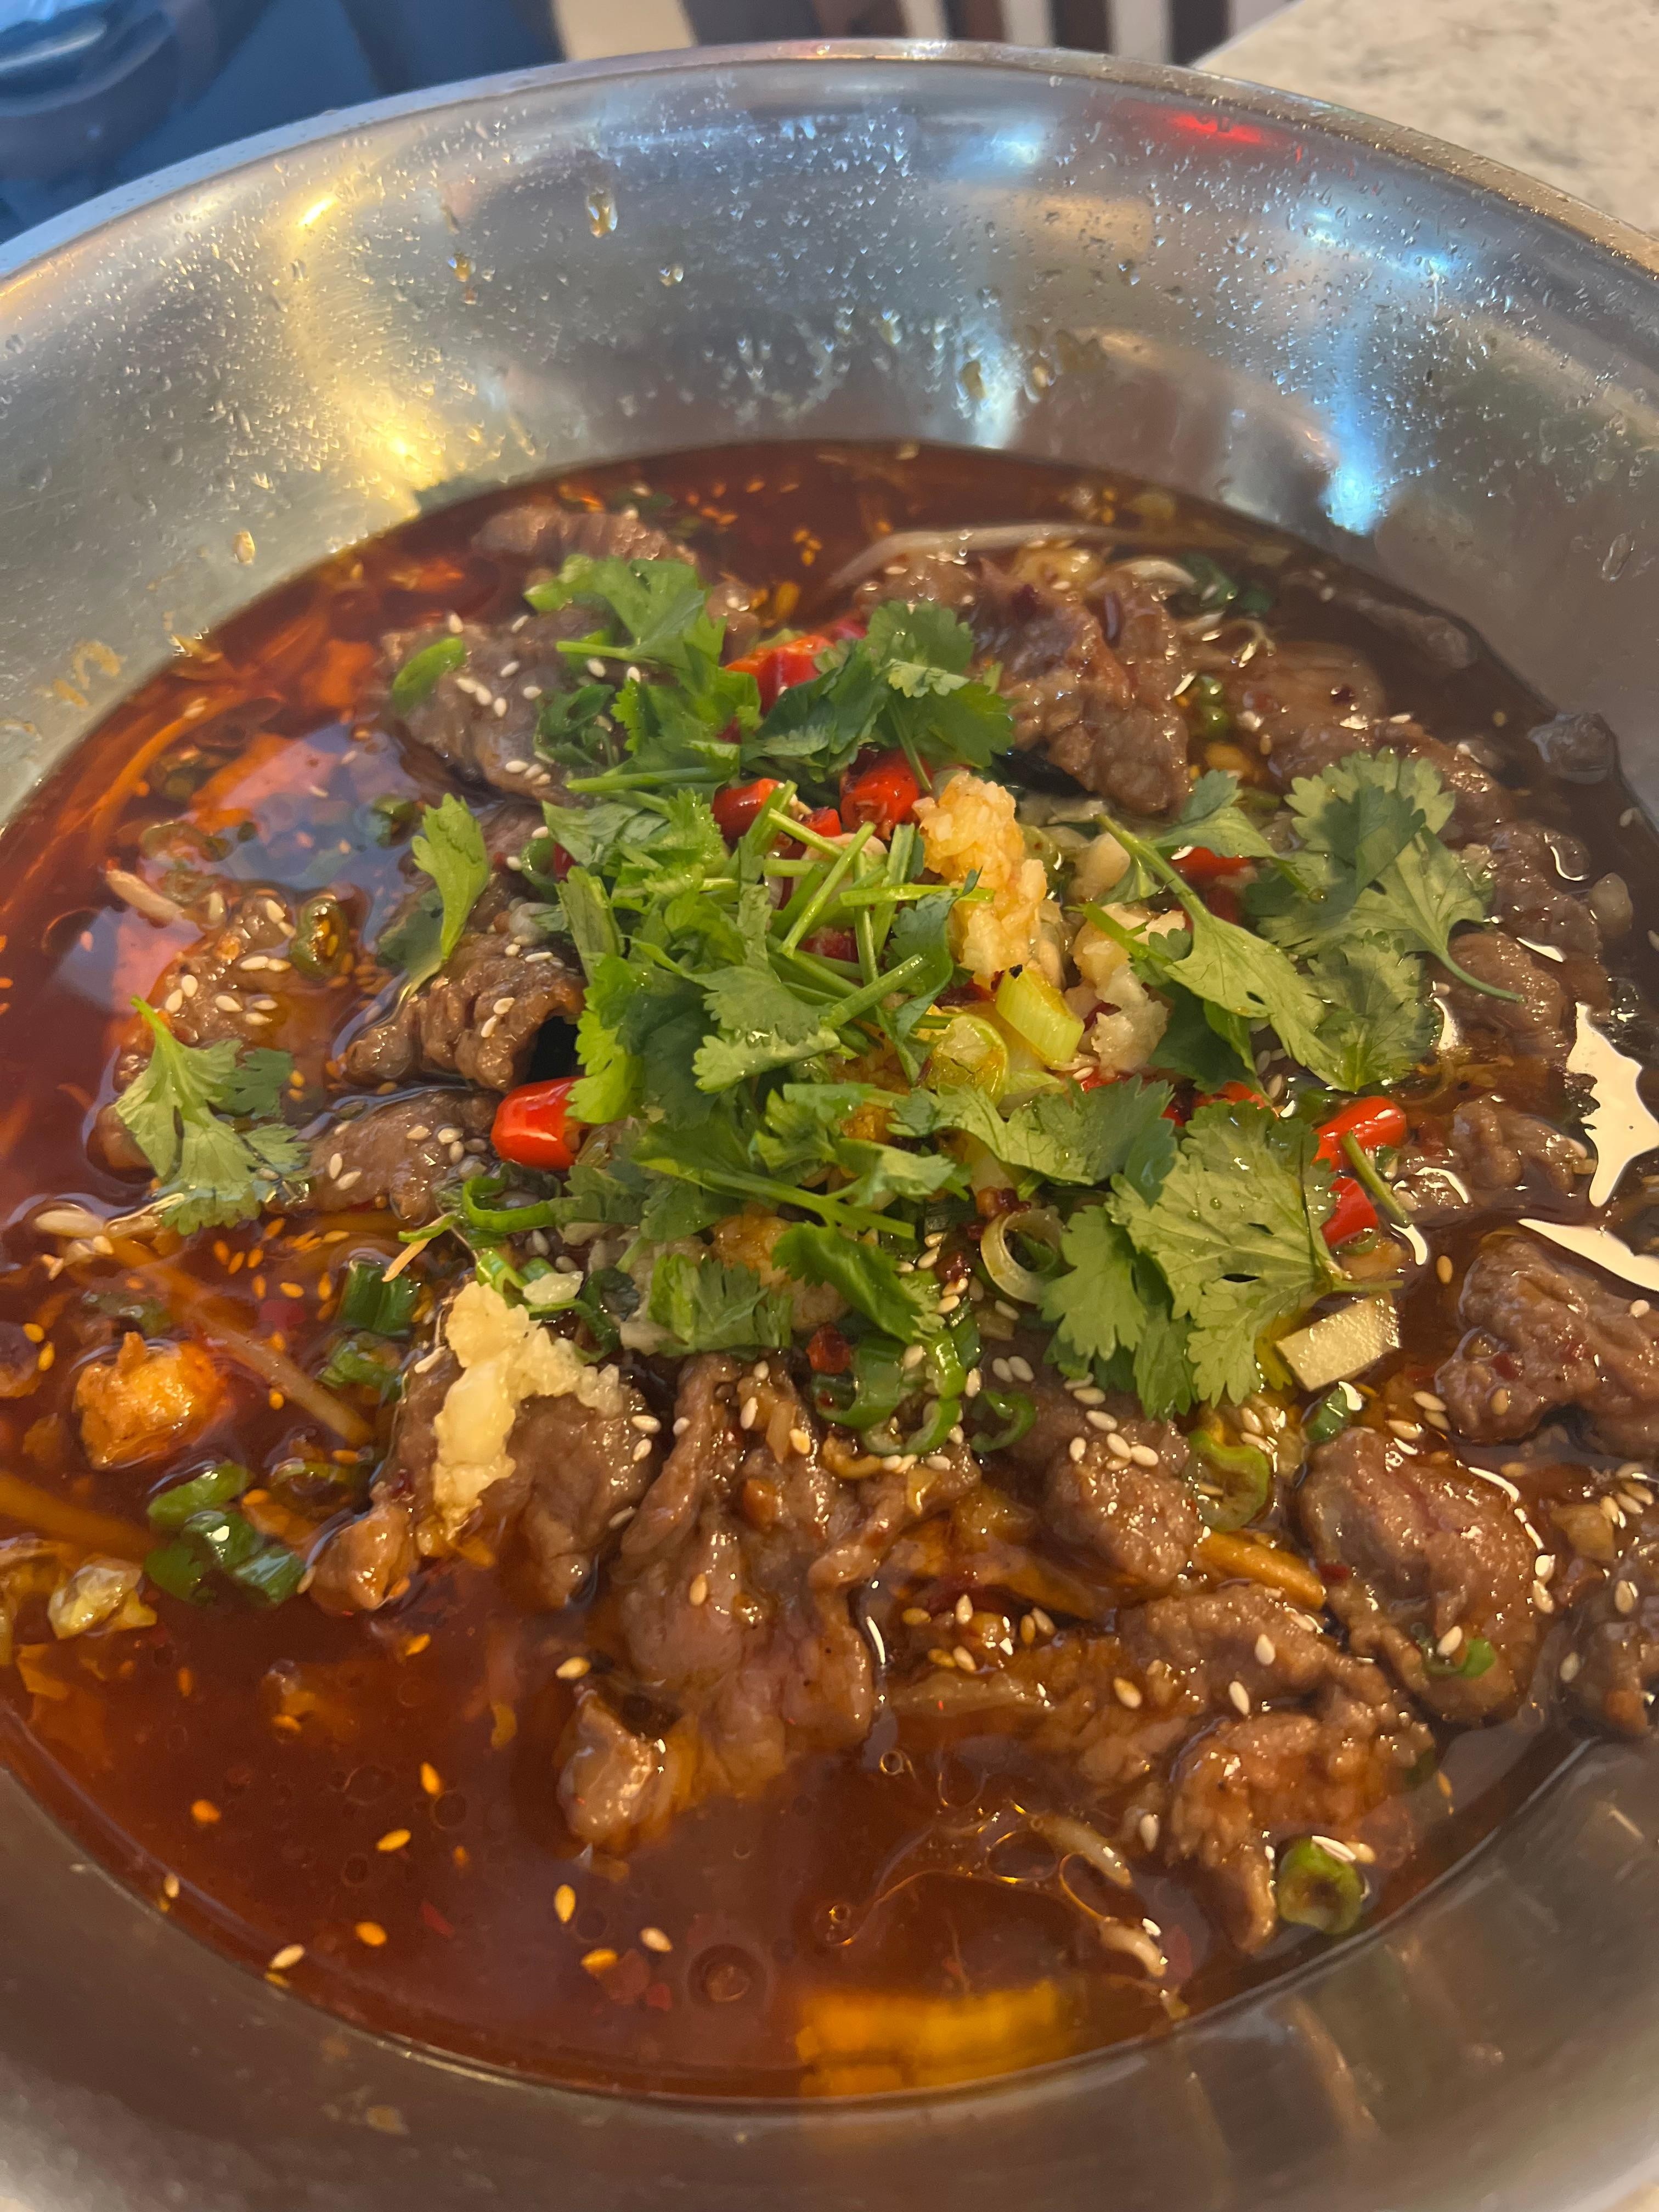 Sliced Beef in Chili Oil